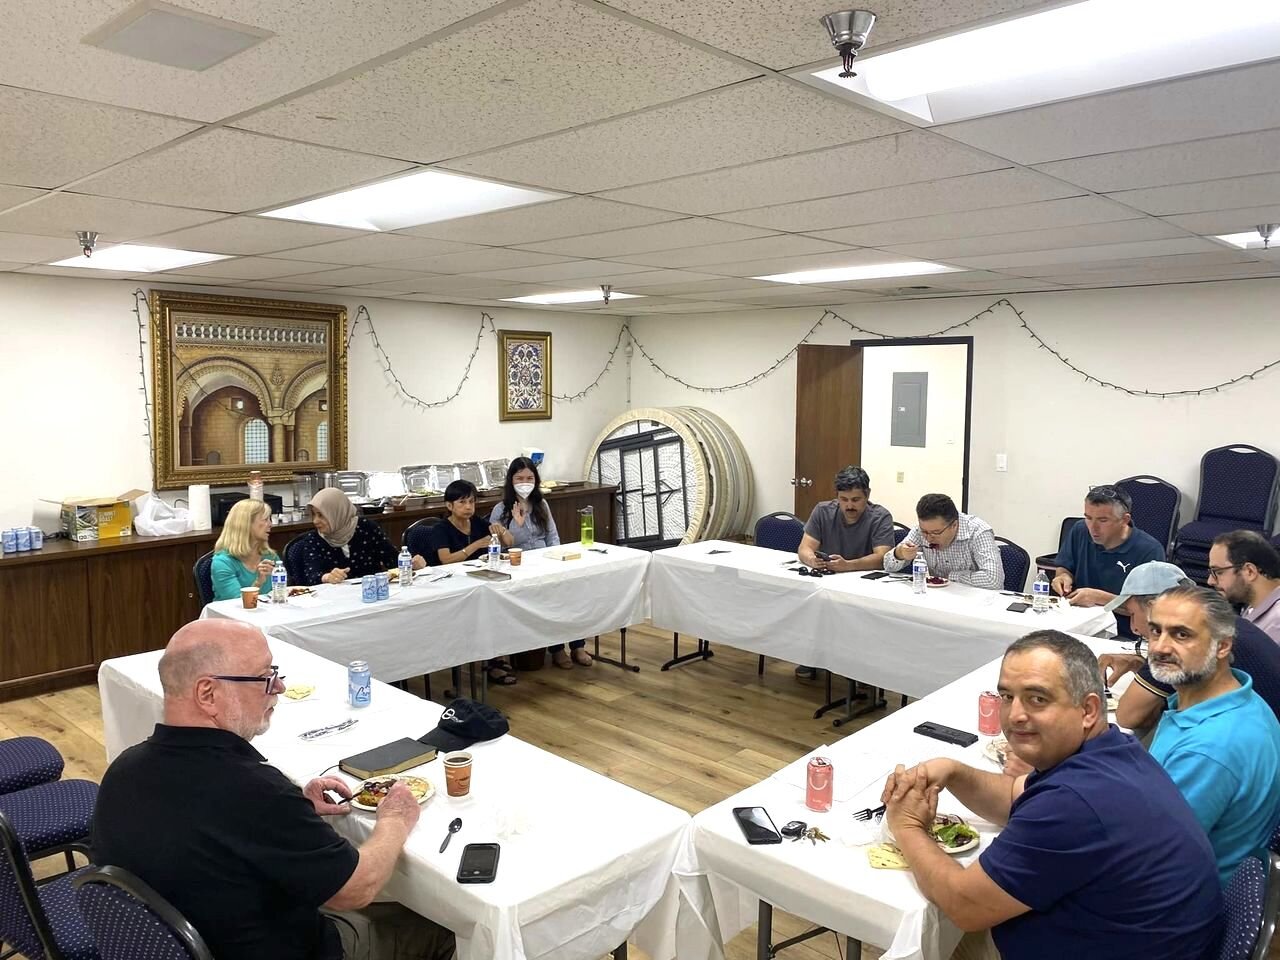 Every month, we meet with a group of local Turkish Muslims in Southern California to share a meal and do multifaith Scriptural Reasoning together. We look at a passage from the Bible or the Qur'an, and discuss - not to teach or convert, but simply to